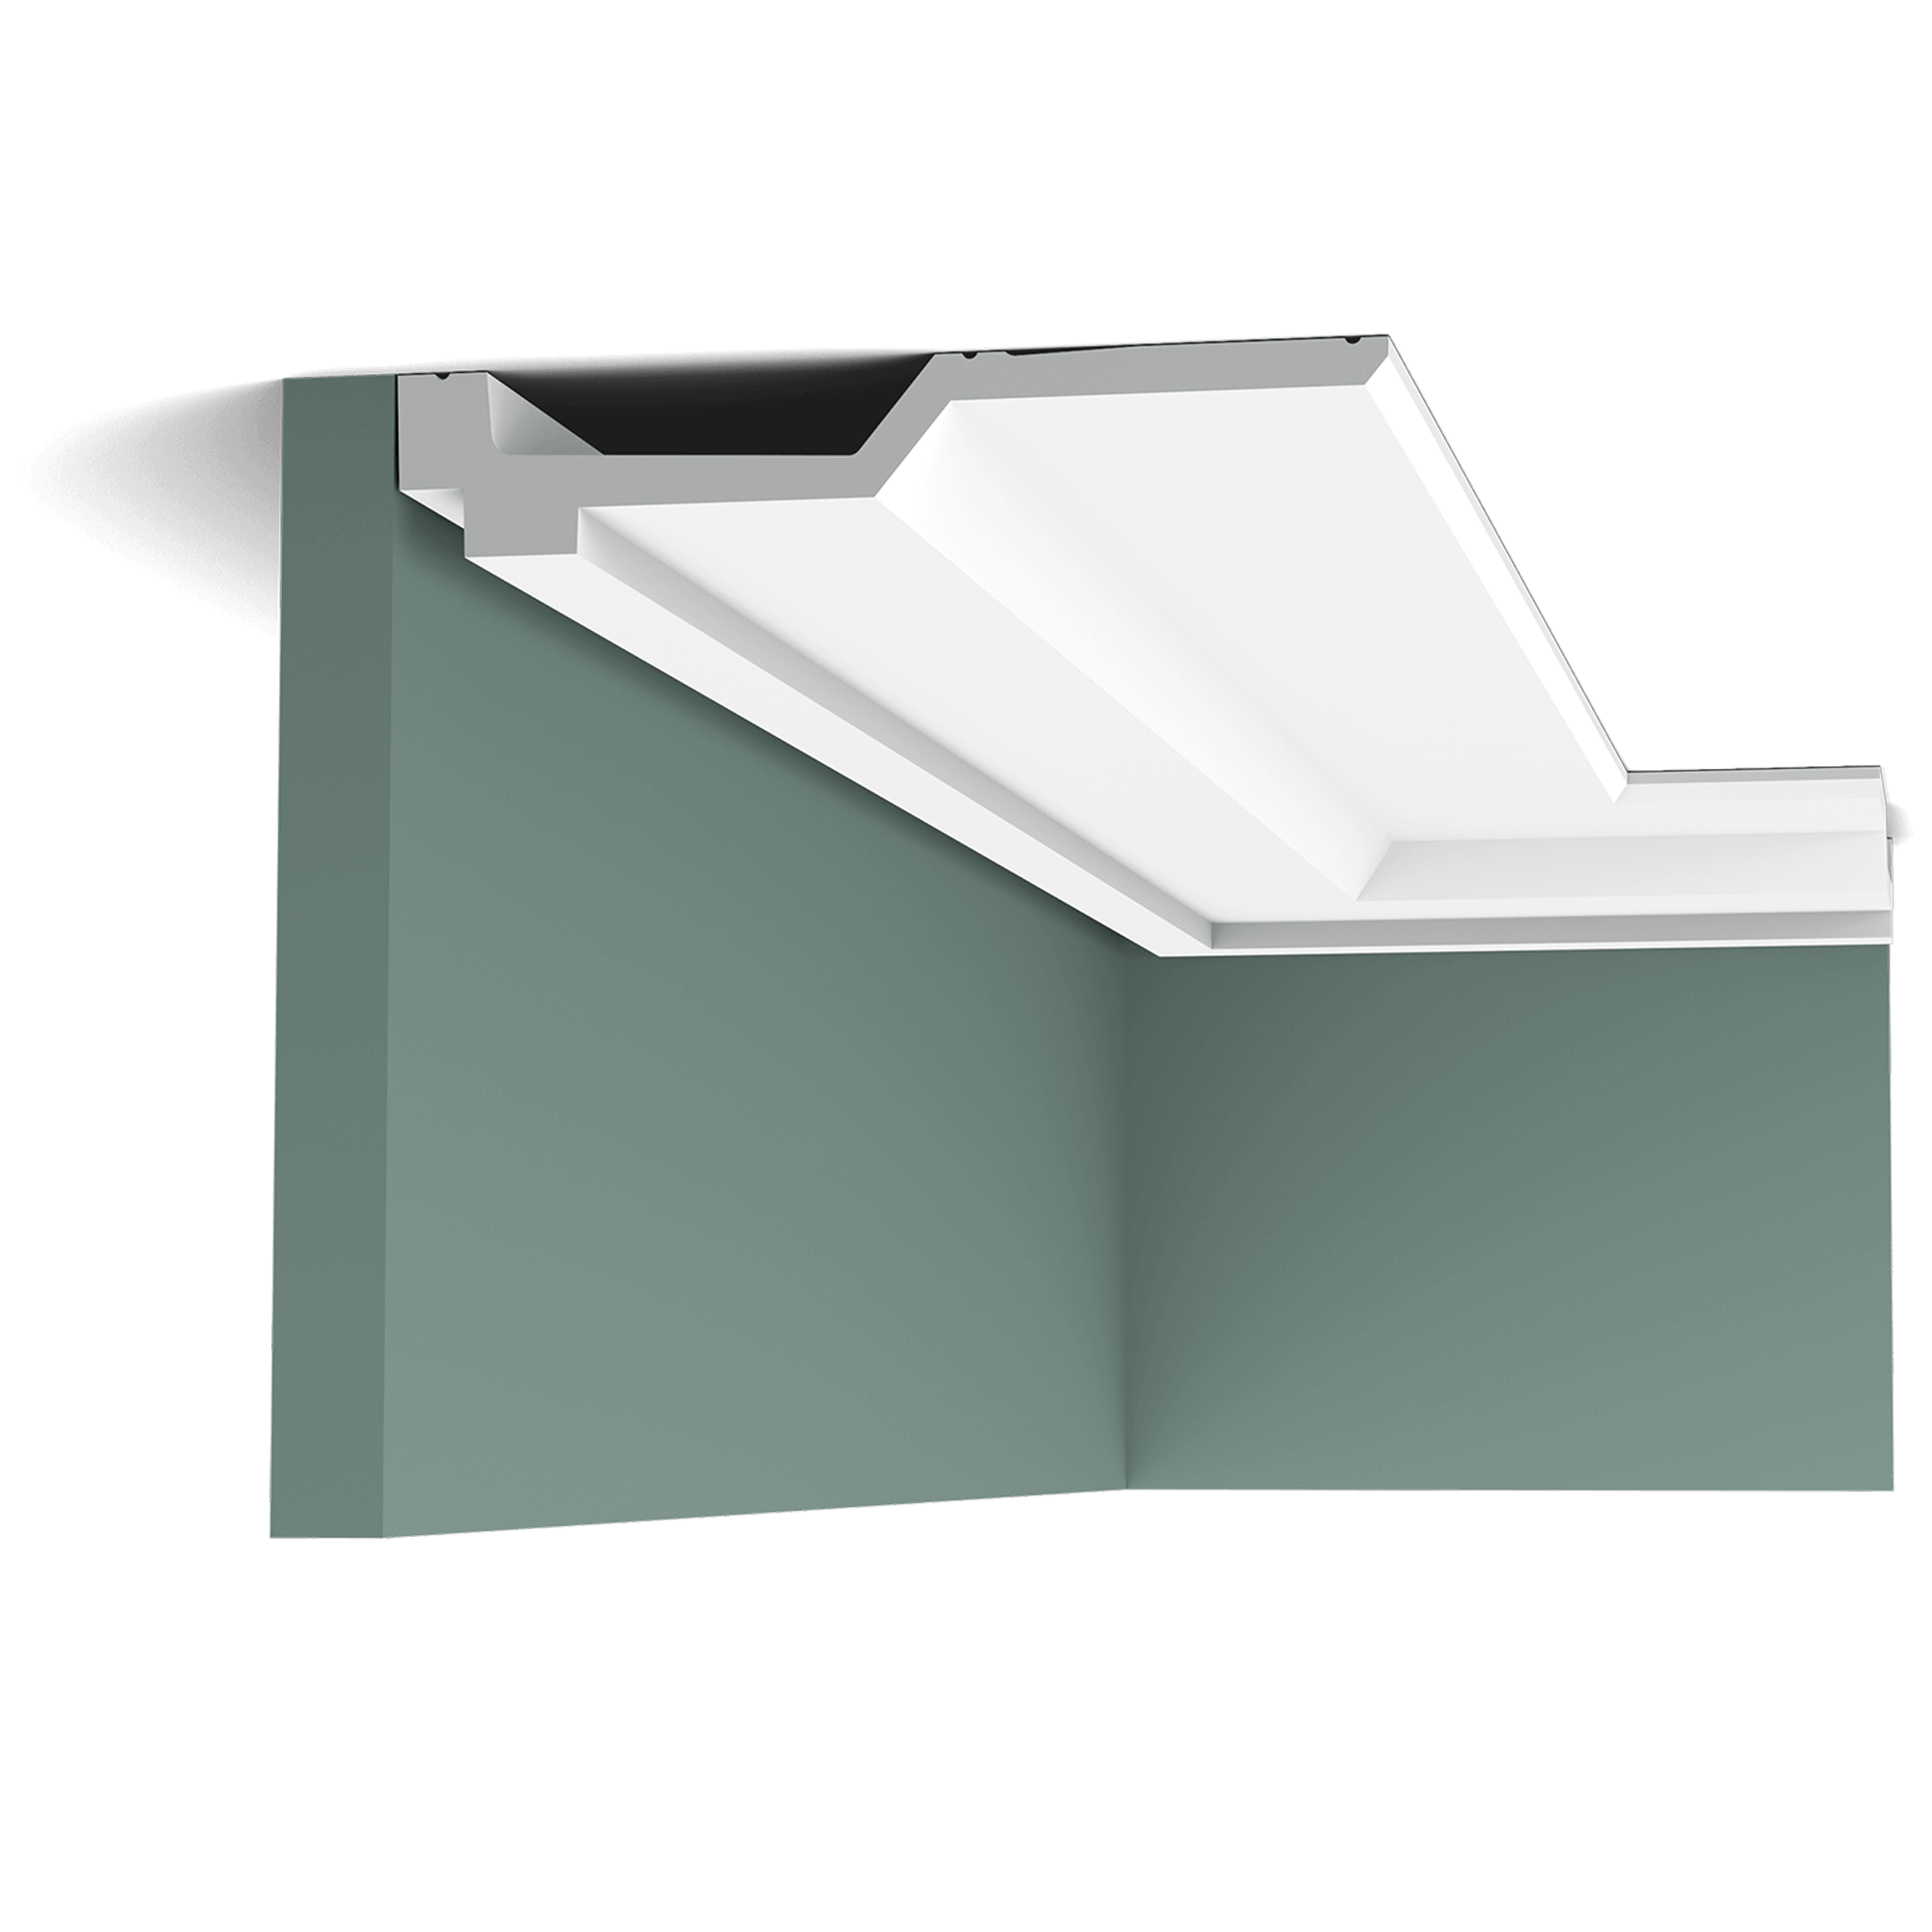 c354 cornice moulding af10 This flat cornice moulding which extends along the ceiling provides a floating effect thanks to the recessed shadow line. Designed by Jacques Vergracht.